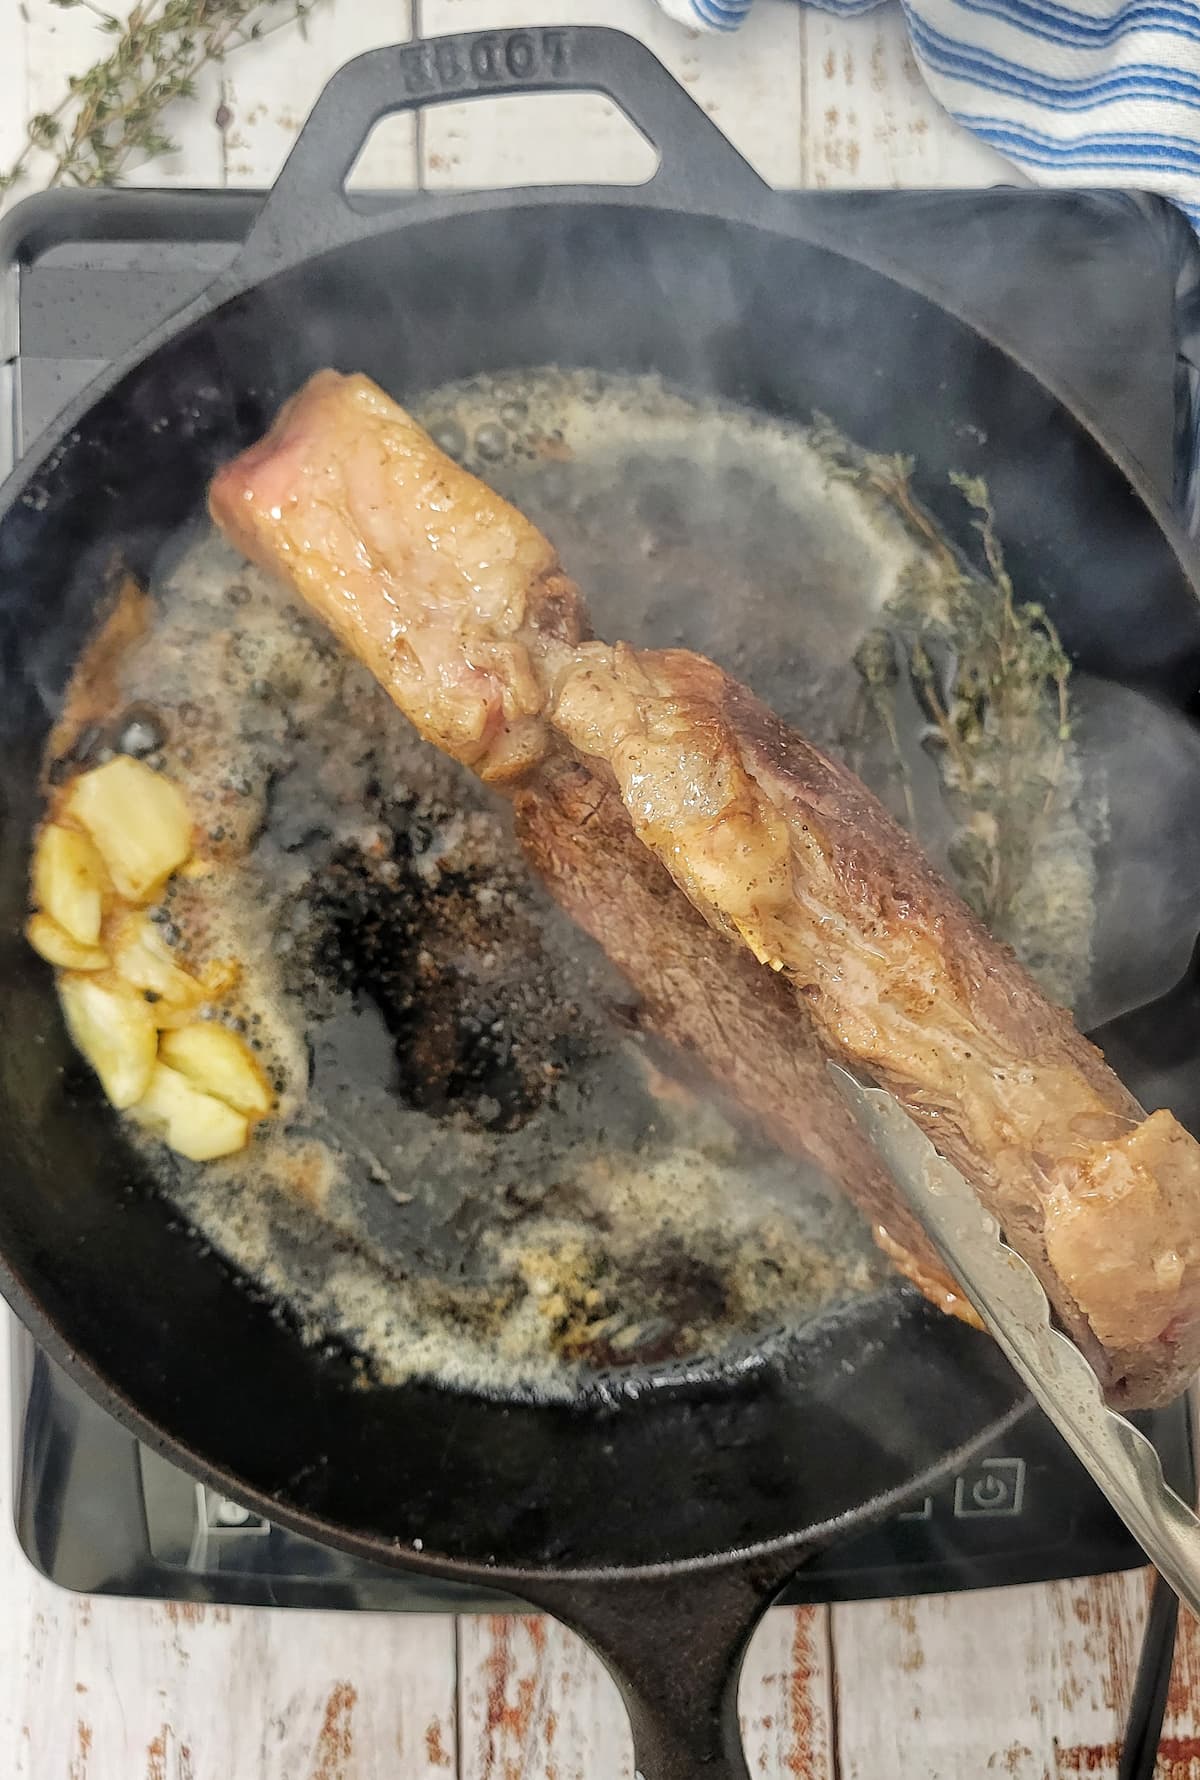 tongs holding a steak on it's side to cook in a cast iron skillet with fresh herbs and garlic